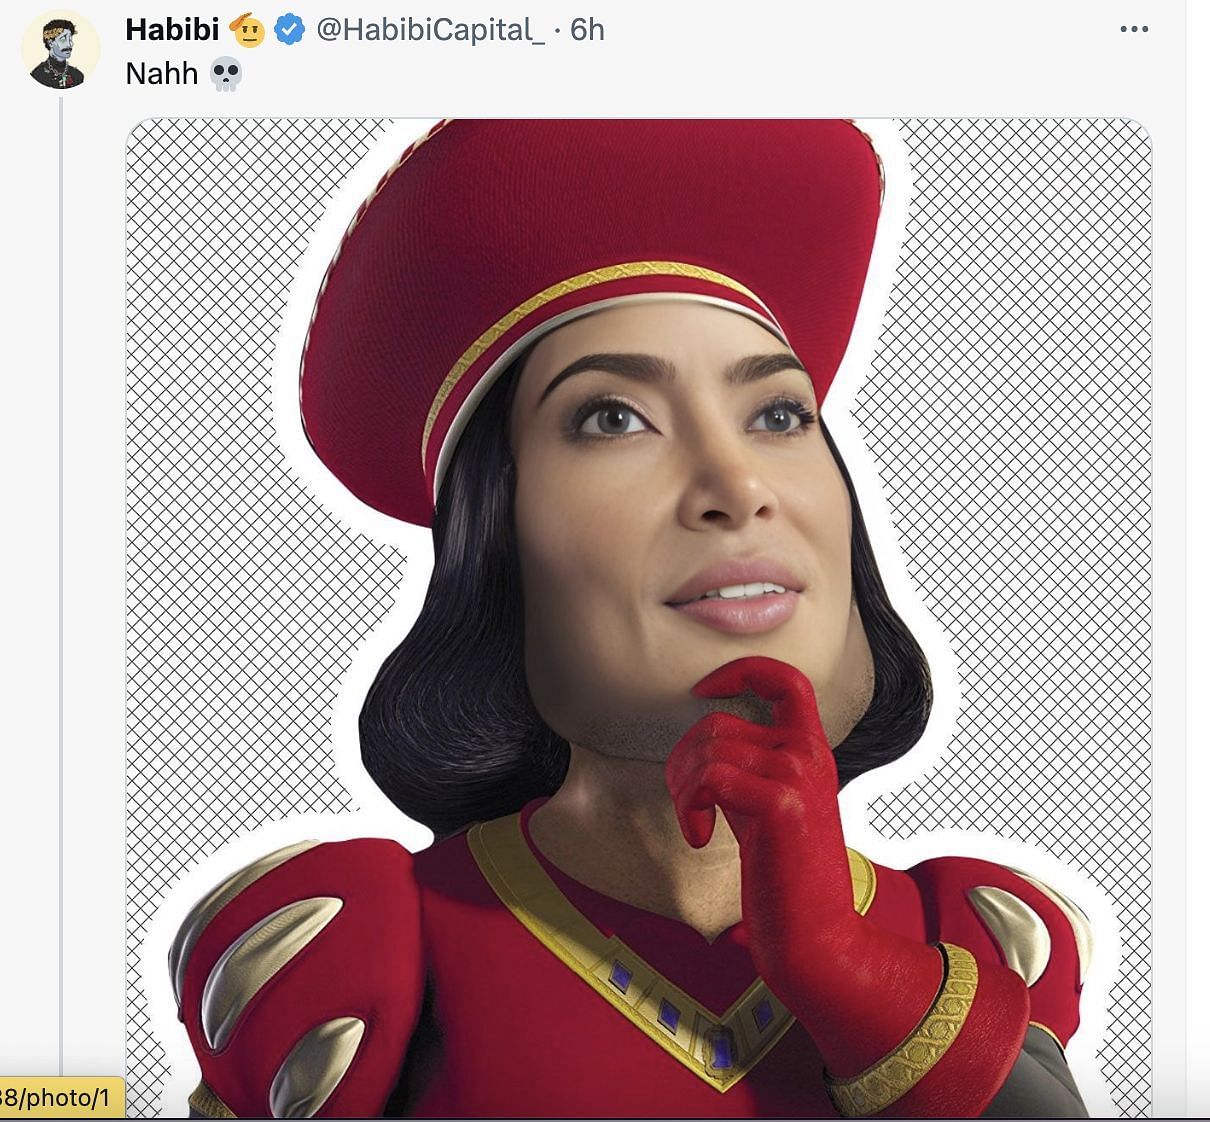 Social media users troll Kardashian after the celebrity was seen sporting a new haircut: Netizens compared her to Shrek villain Lord Farquaad. (Image via Twitter)